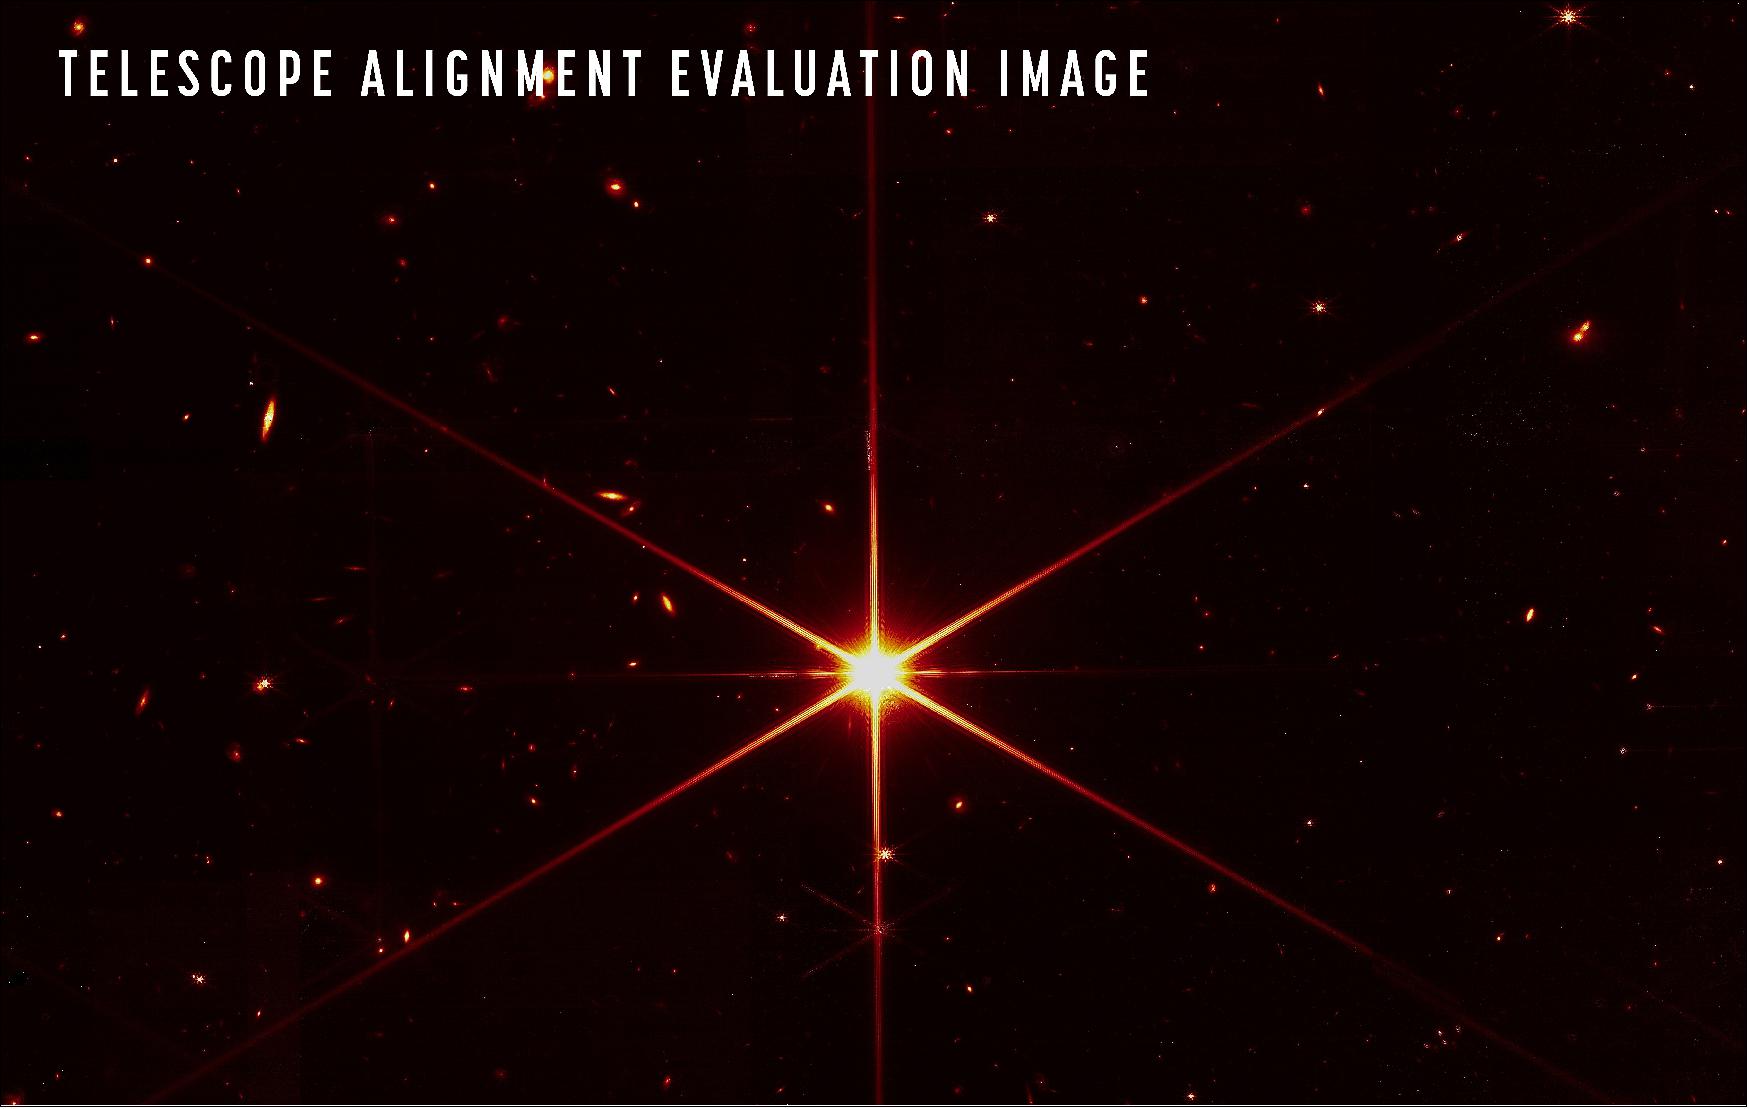 Figure 25: While the purpose of this image was to focus on the bright star at the center for alignment evaluation, Webb's optics and NIRCam are so sensitive that the galaxies and stars seen in the background show up. At this stage of Webb's mirror alignment, known as "fine phasing," each of the primary mirror segments have been adjusted to produce one unified image of the same star using only the NIRCam instrument. This image of the star, which is called 2MASS J17554042+6551277, uses a red filter to optimize visual contrast (image credits: NASA/STScI)